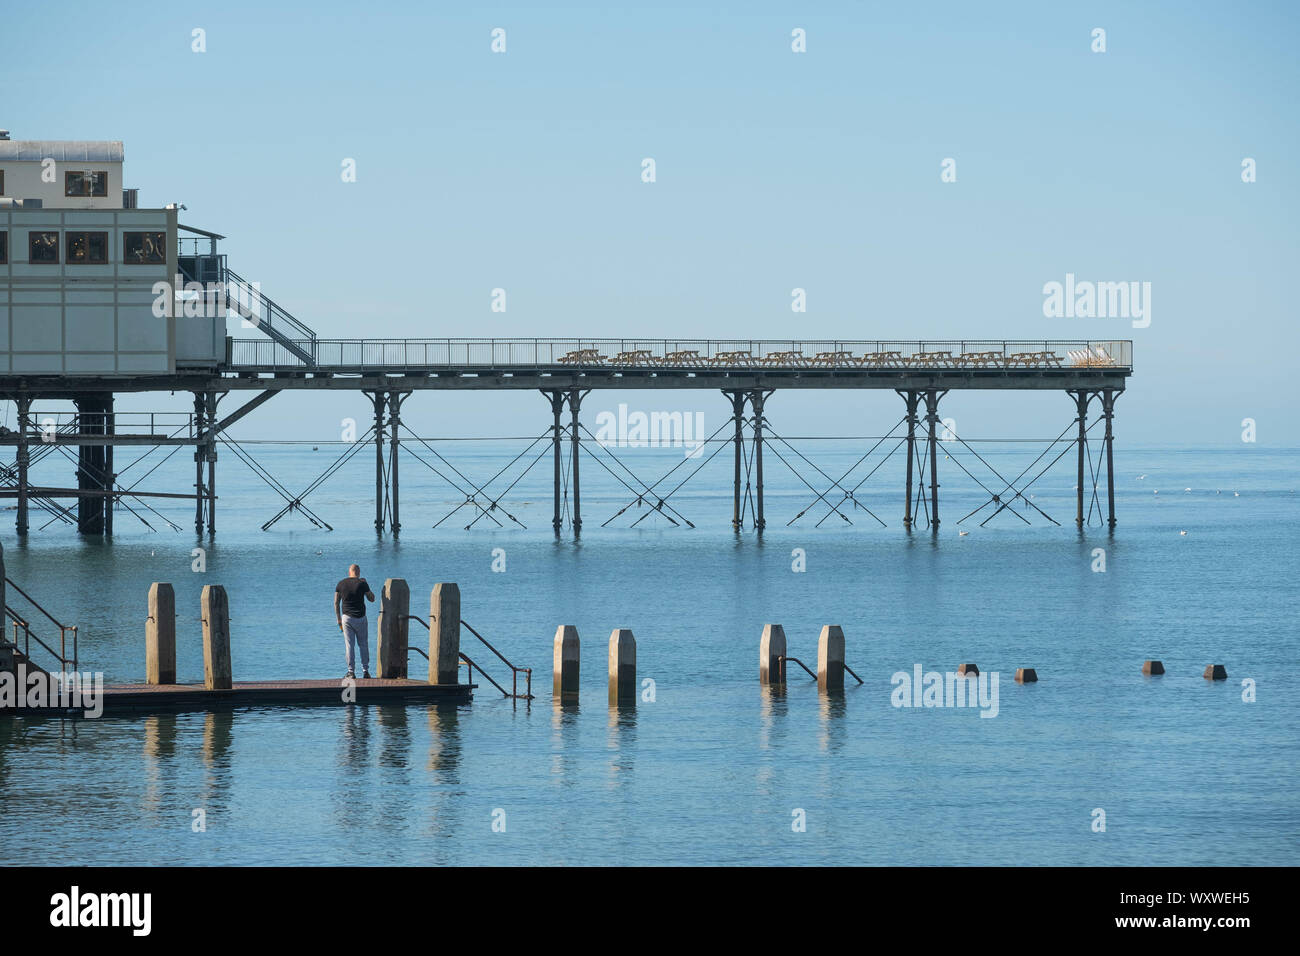 Aberystwyth Wales UK, Wednesday 18th September 2019  UK Weather: People on the wooden jetty making the most of a day of clear blue skies and warm September sunshine at the seaside in Aberystwyth on the Cardigan Bay coast, west Wales, as a high pressure system dominates the weather over the souther half of the UK. Photo credit Keith Morris / Alamy Live News Stock Photo